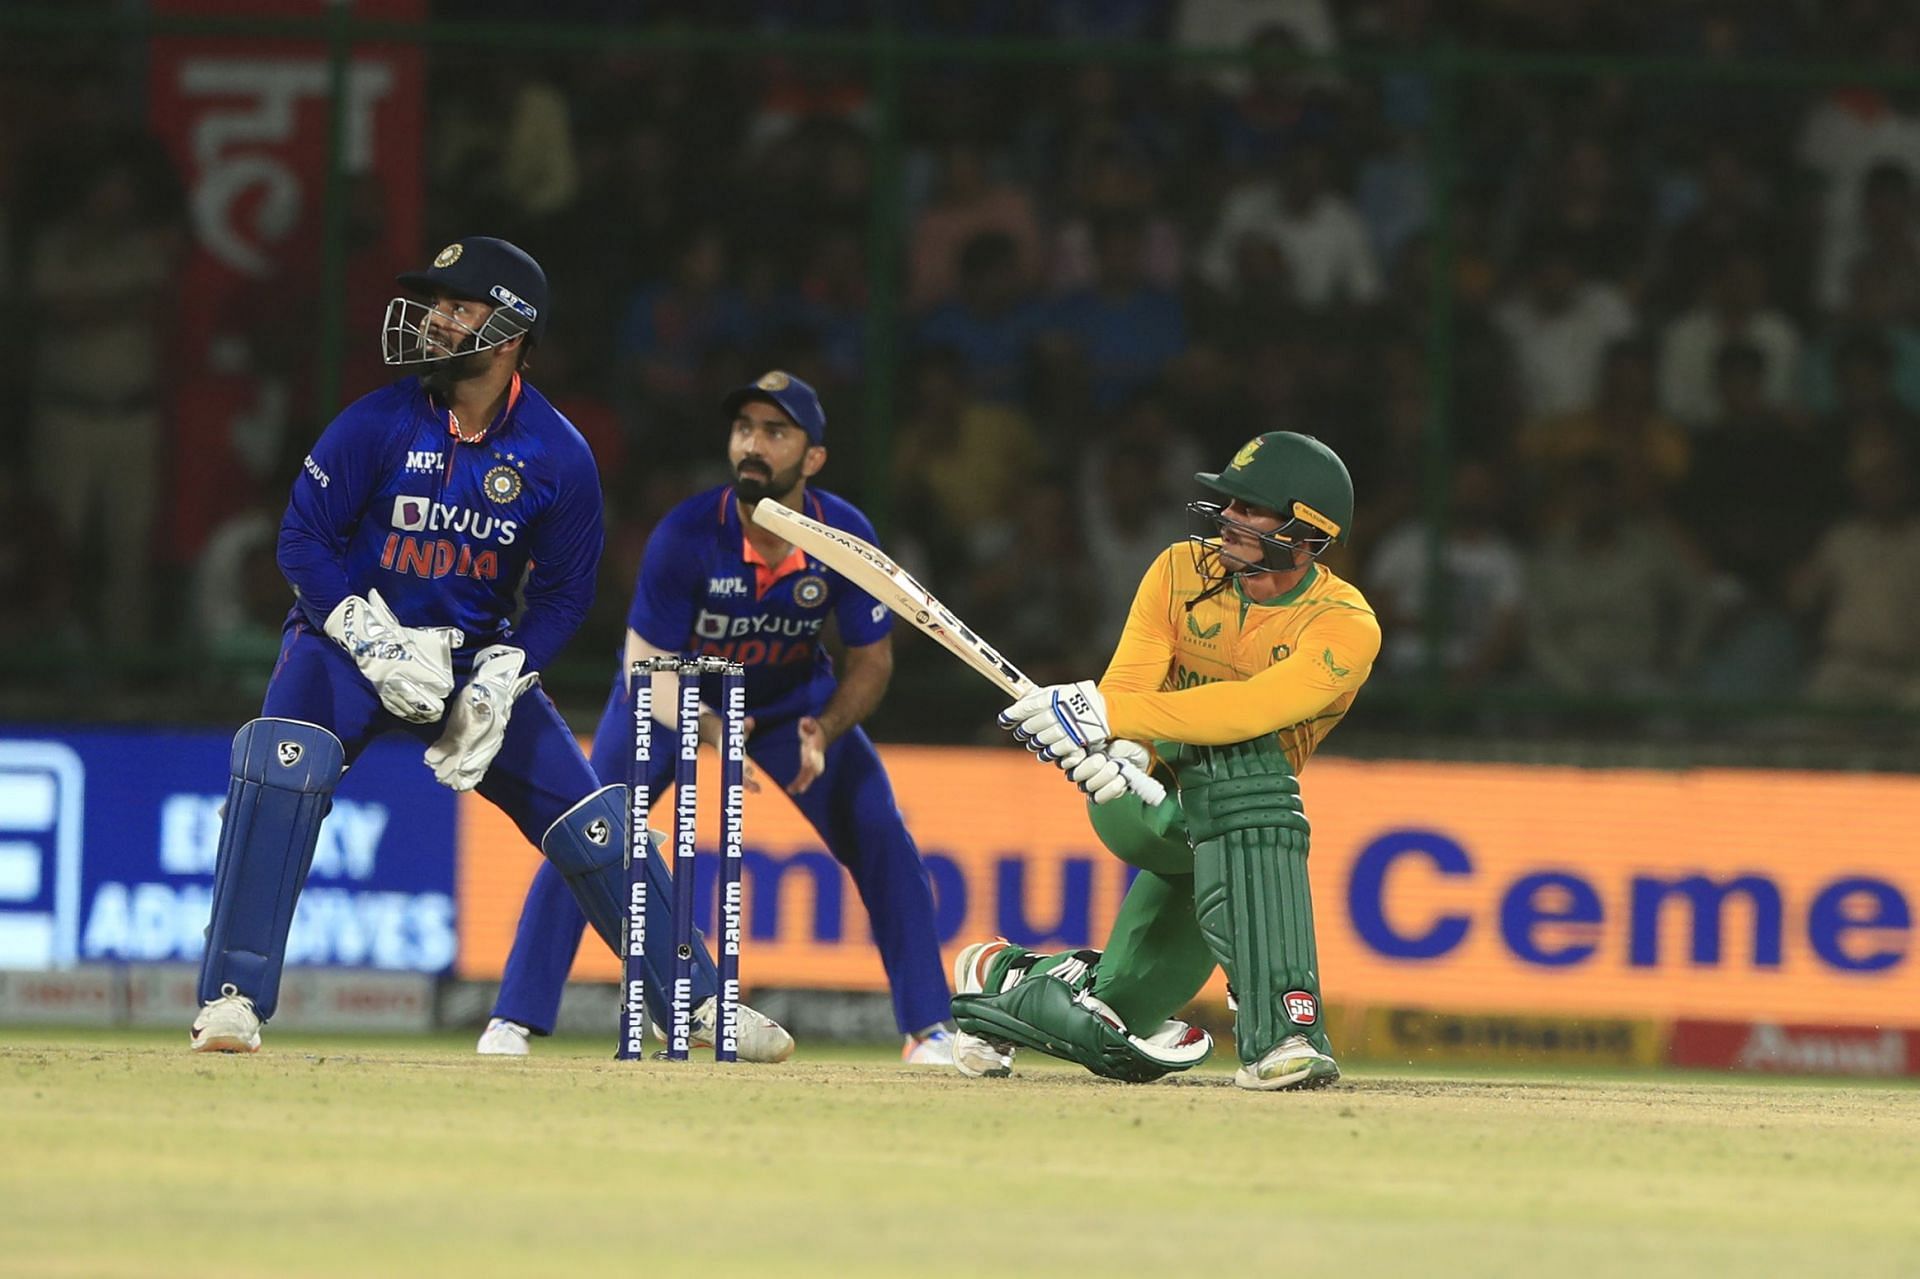 Quinton de Kock failed to convert the start in the 1st T20I (Credit: BCCI)